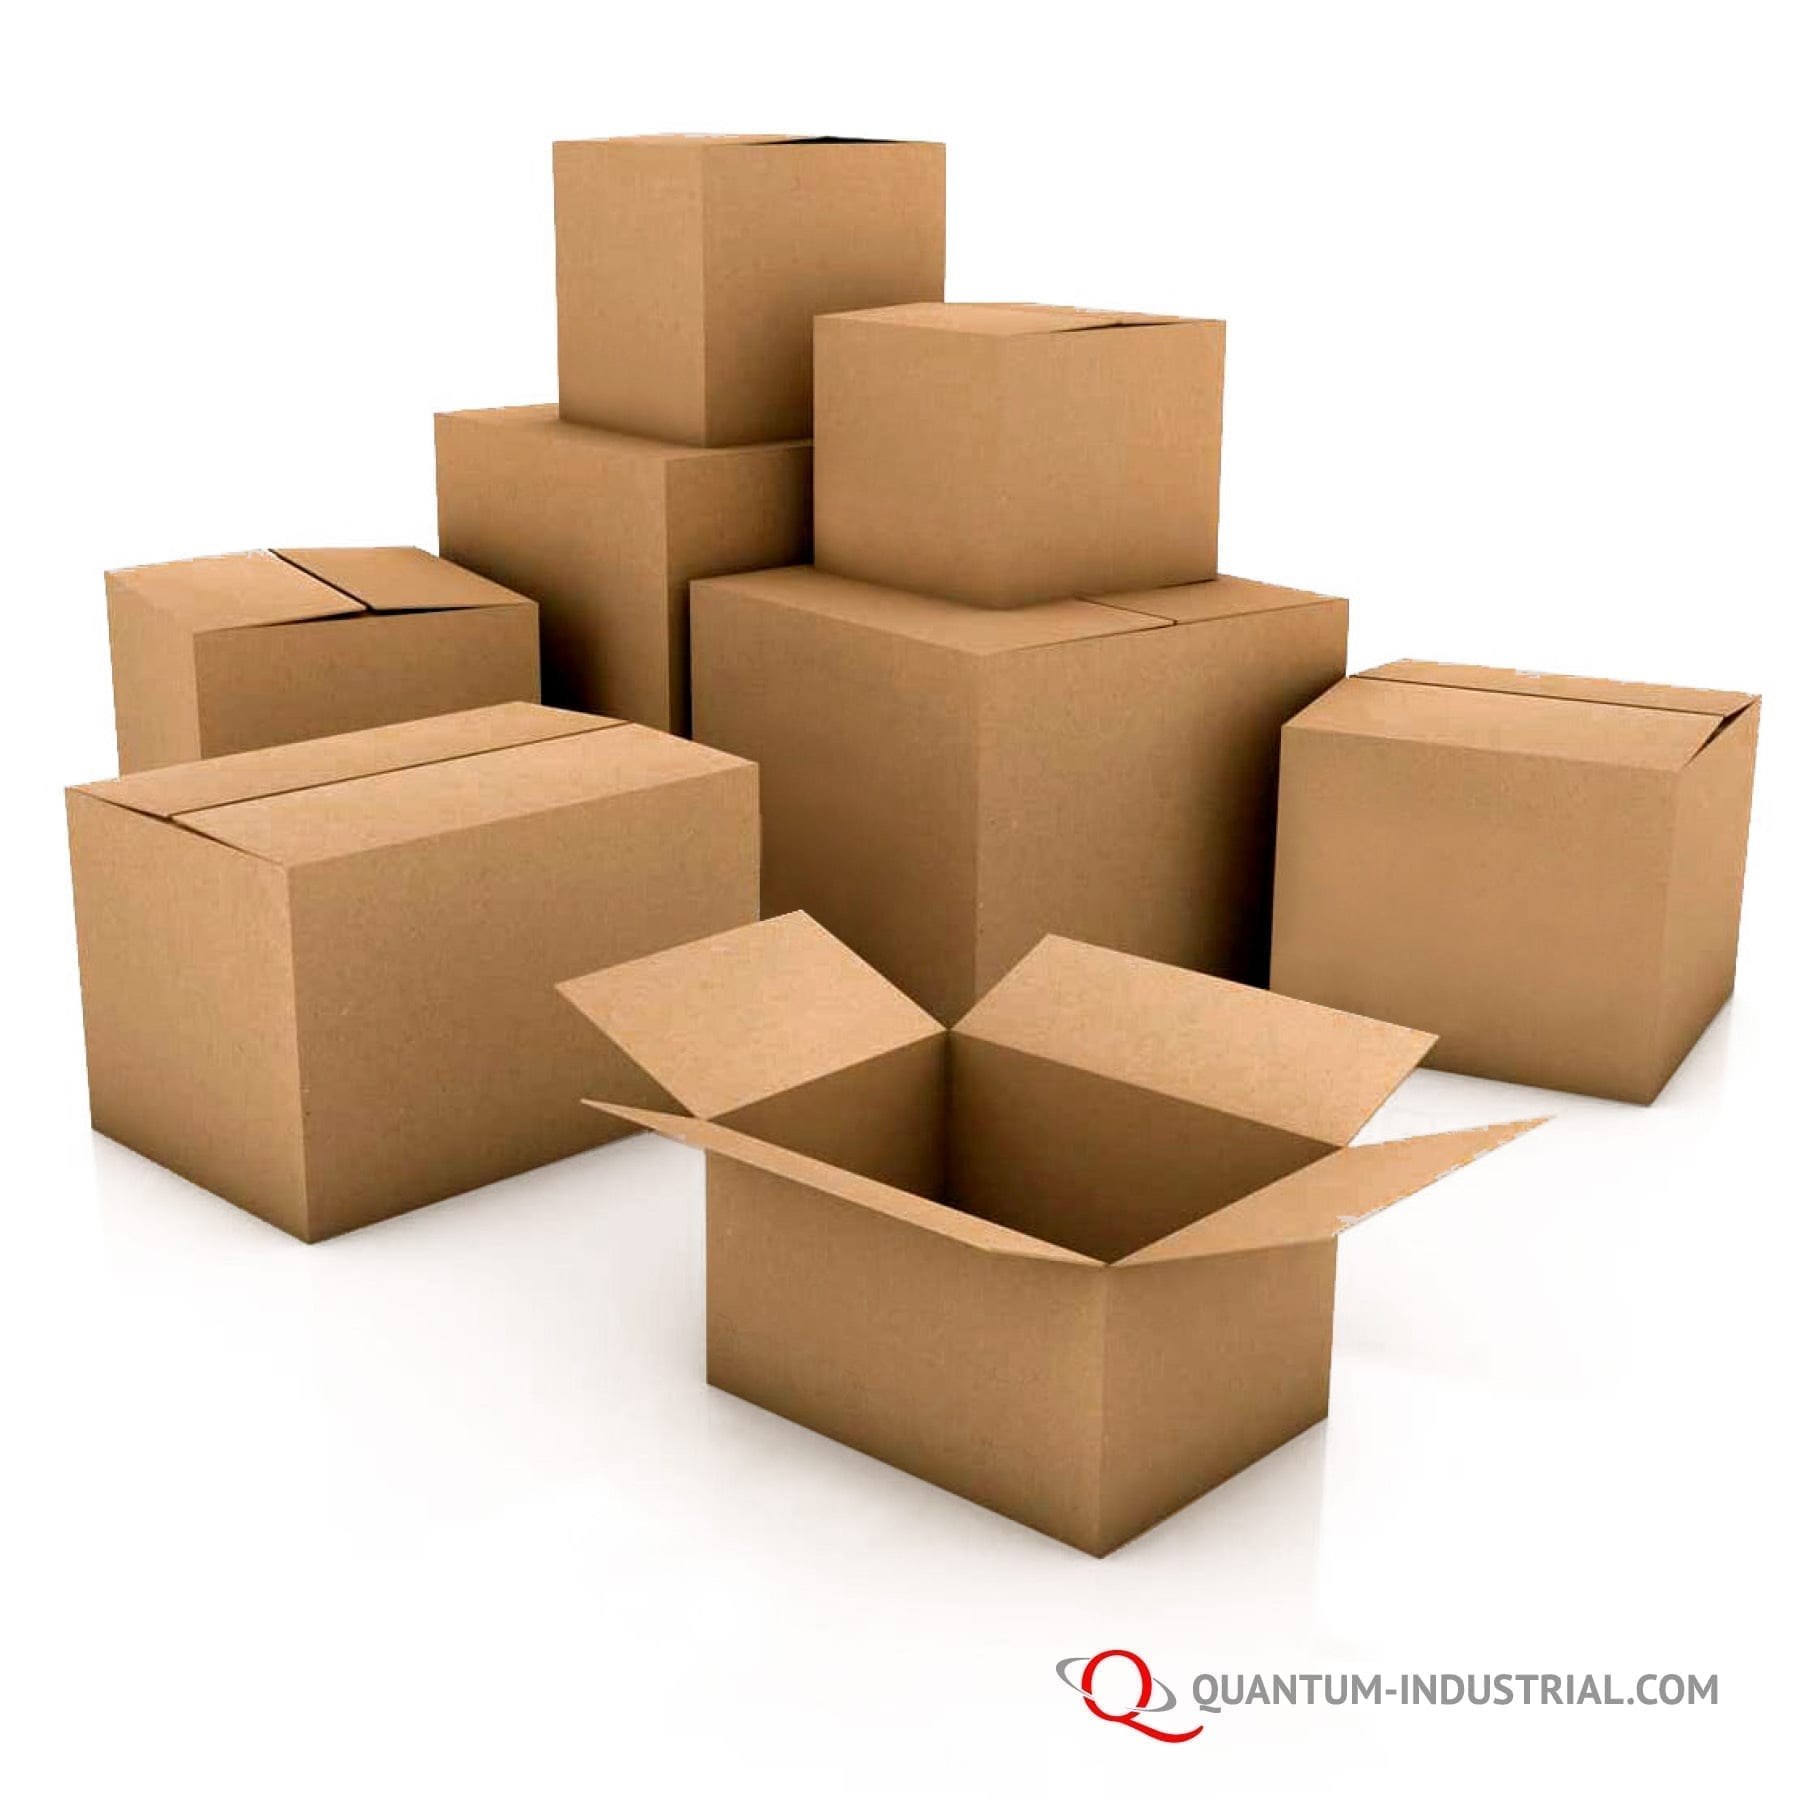 25 14x14x6 Cardboard Shipping Boxes Cartons Packing Moving Mailing Storage Box 